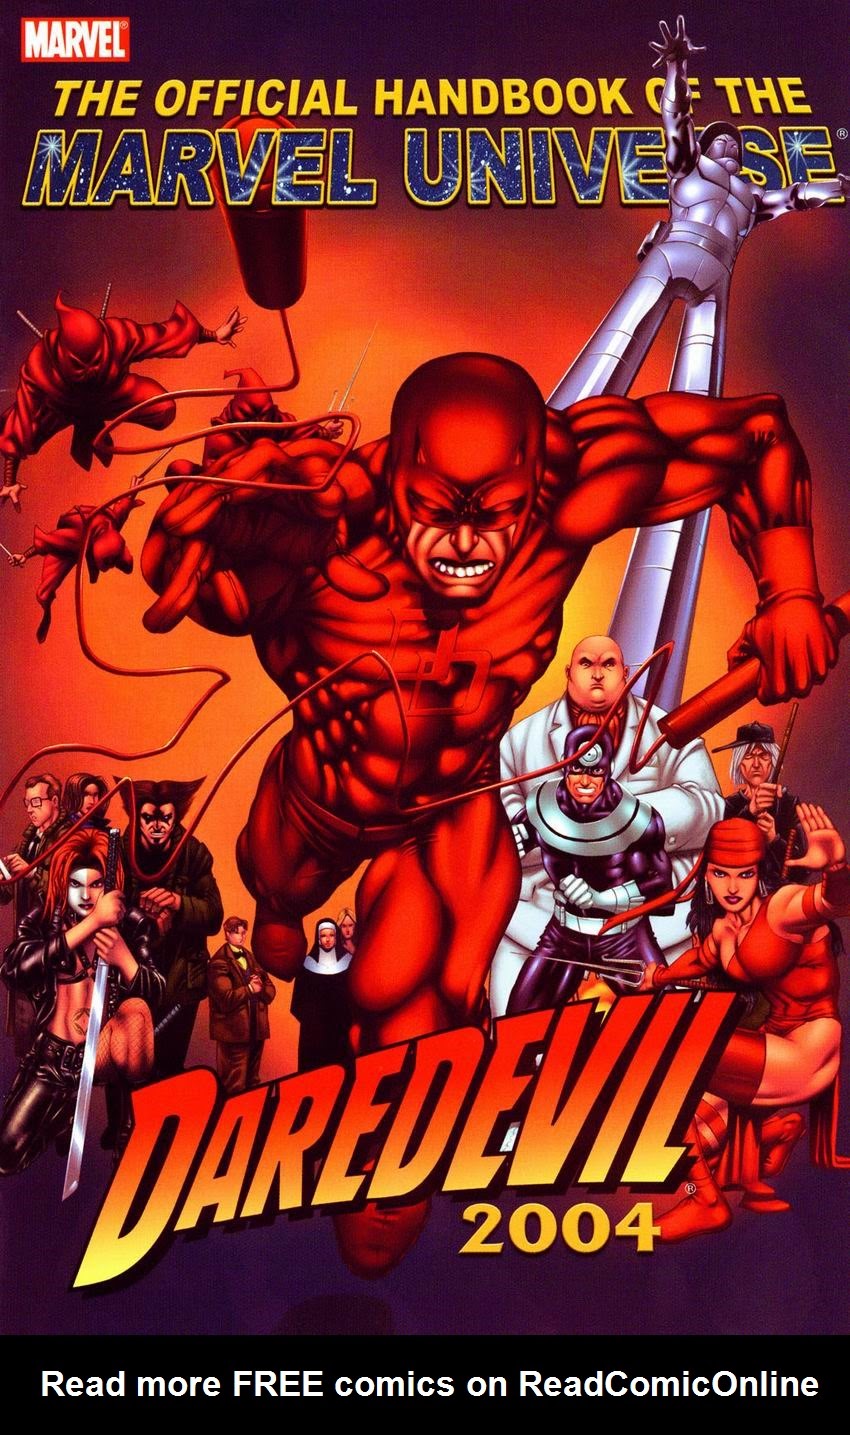 Read online Official Handbook of the Marvel Universe: Daredevil 2004 comic -  Issue # Full - 1